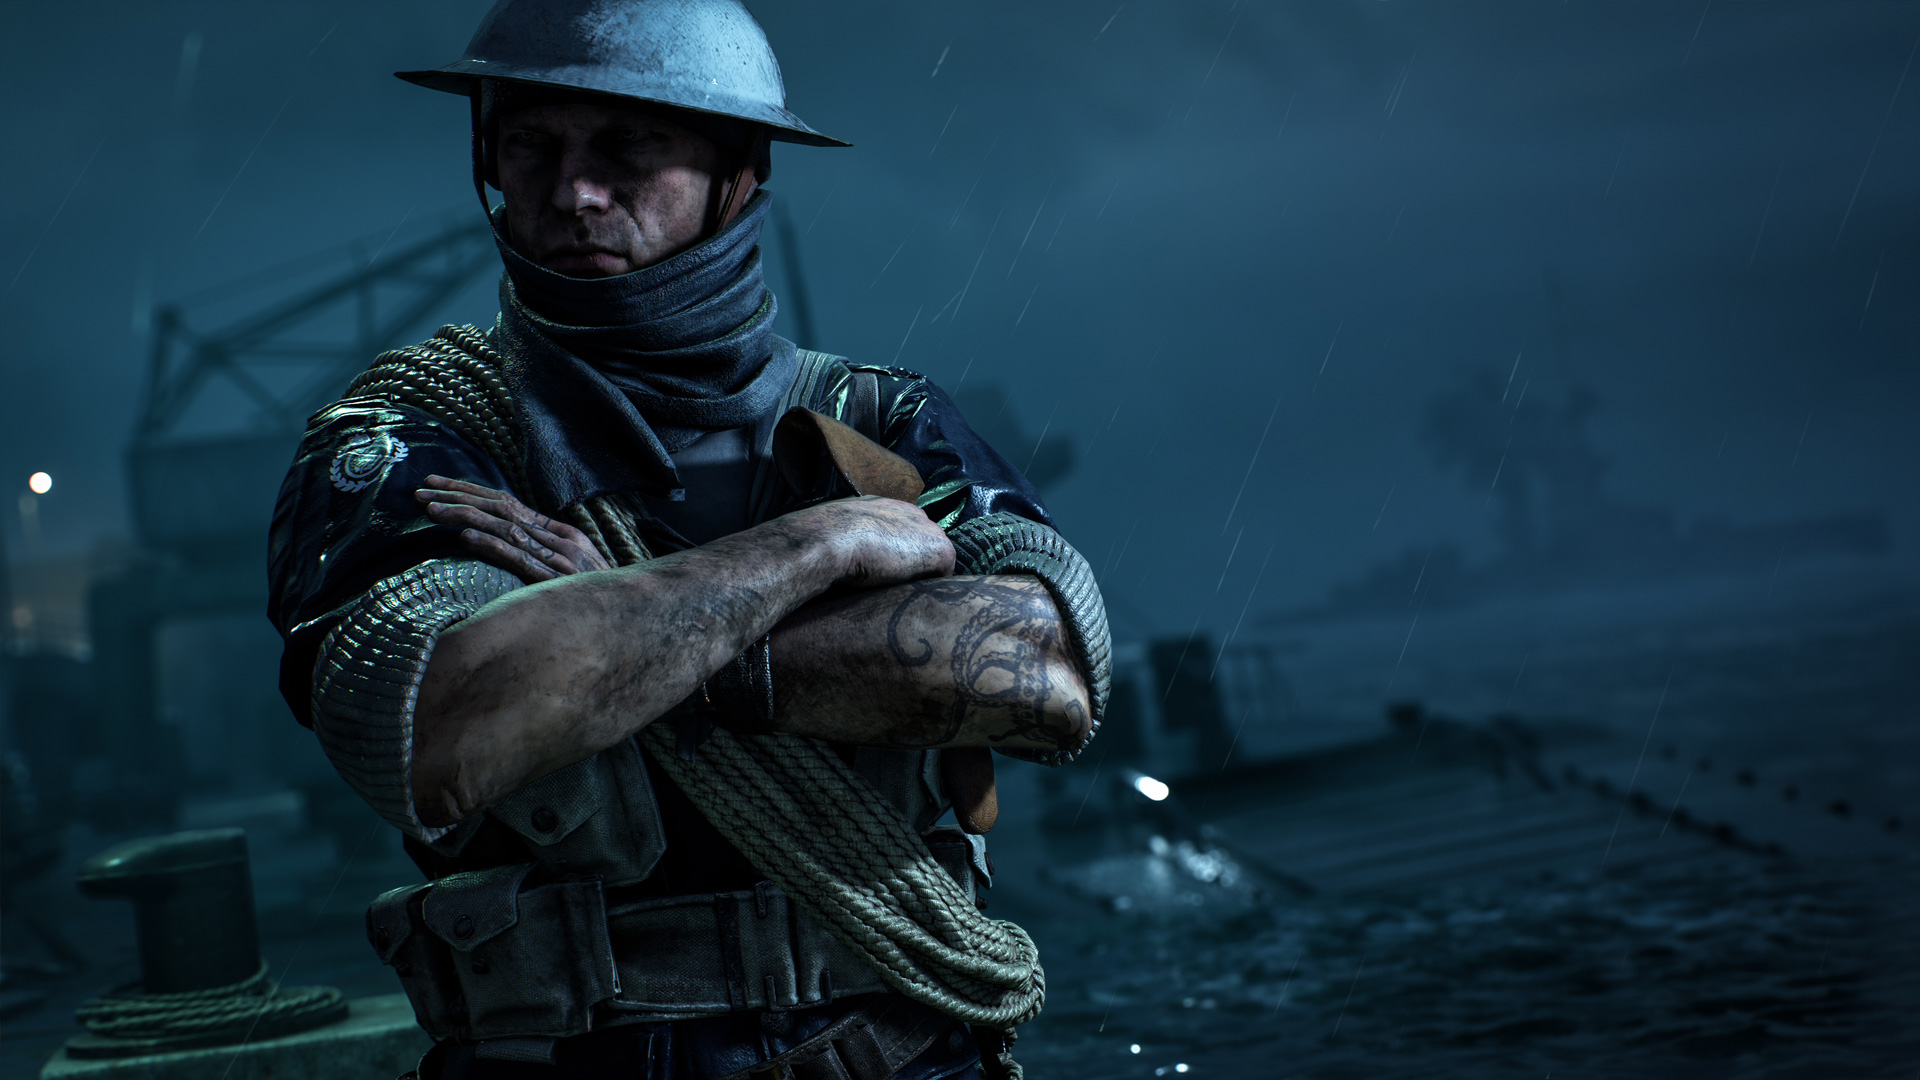 General 1920x1080 Battlefield (game) Battlefield 1 video games soldier helmet tattoo rain ropes EA DICE Electronic Arts World War I arms crossed video game art screen shot video game characters CGI closed mouth frown